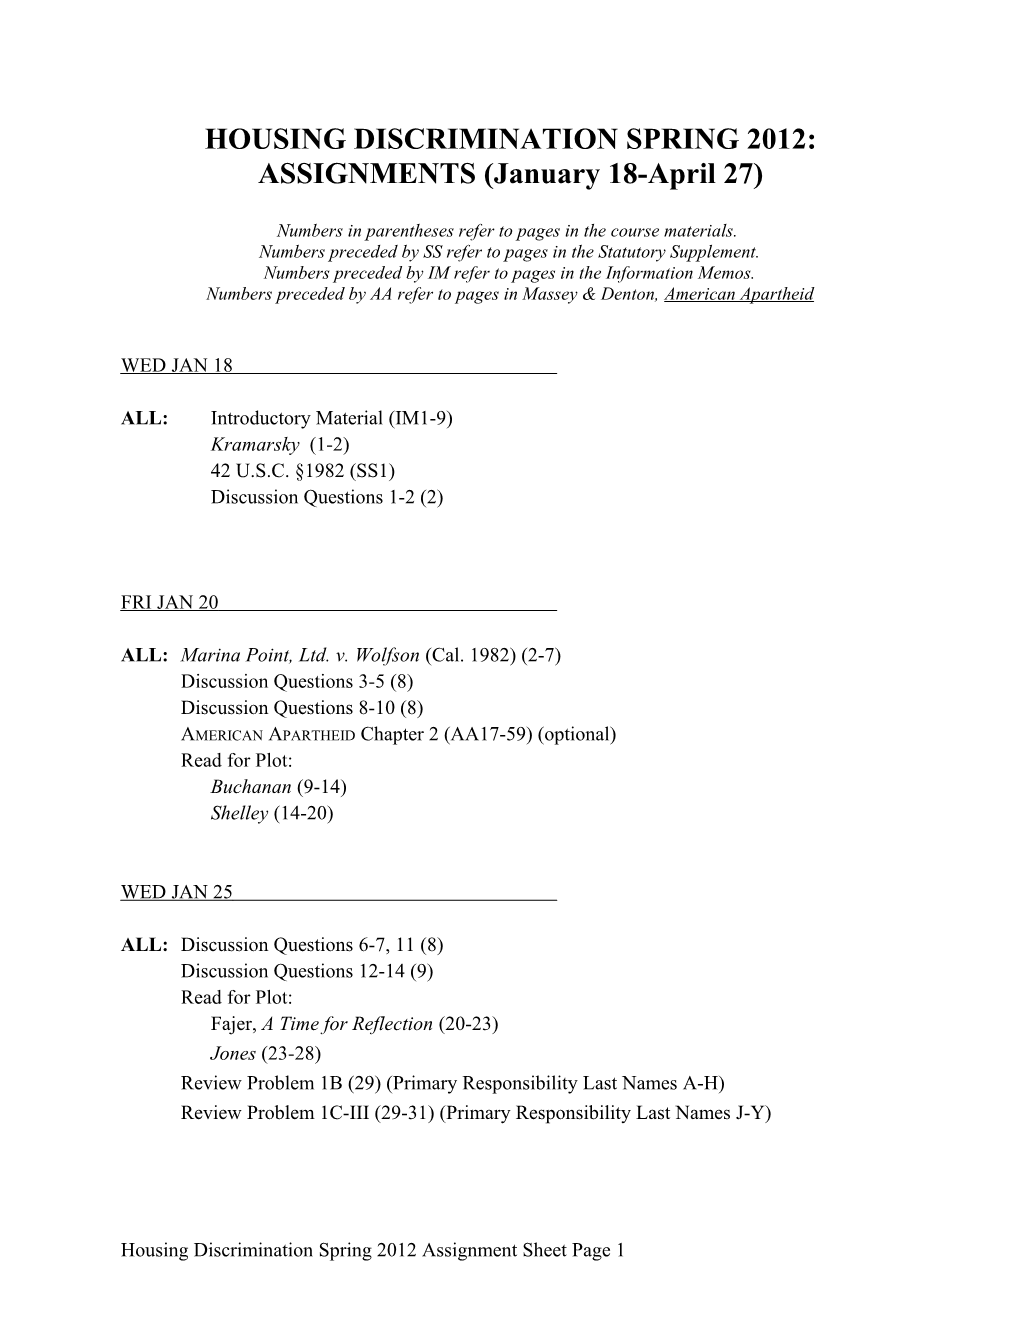 HOUSING DISCRIMINATION SPRING 2012: ASSIGNMENTS (January 18-April 27)